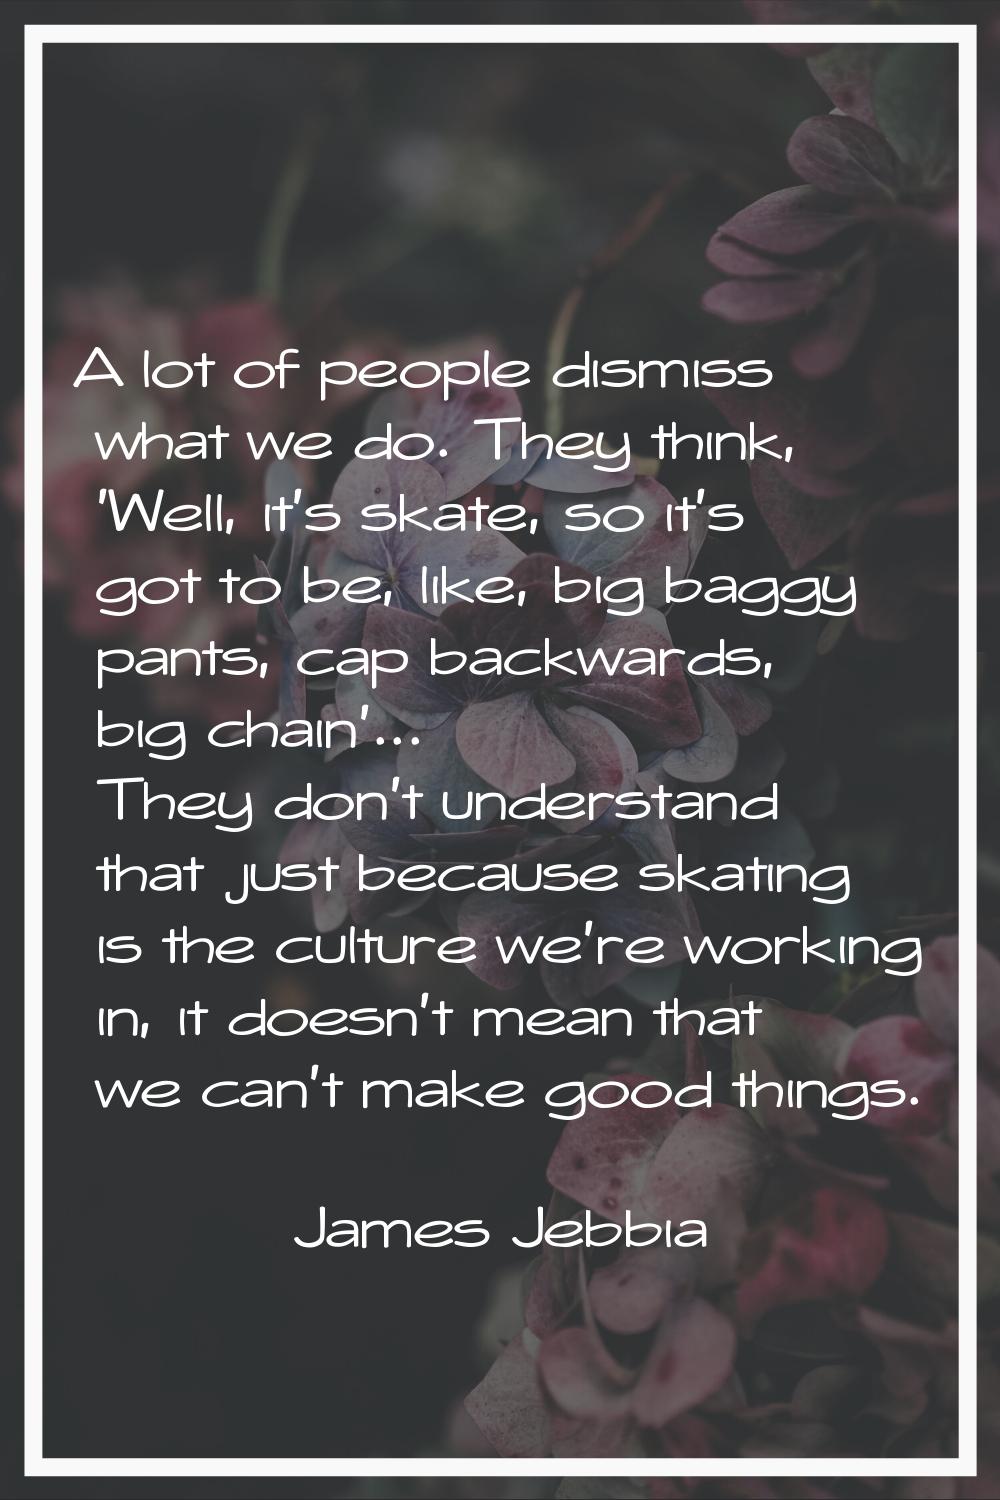 A lot of people dismiss what we do. They think, 'Well, it's skate, so it's got to be, like, big bag